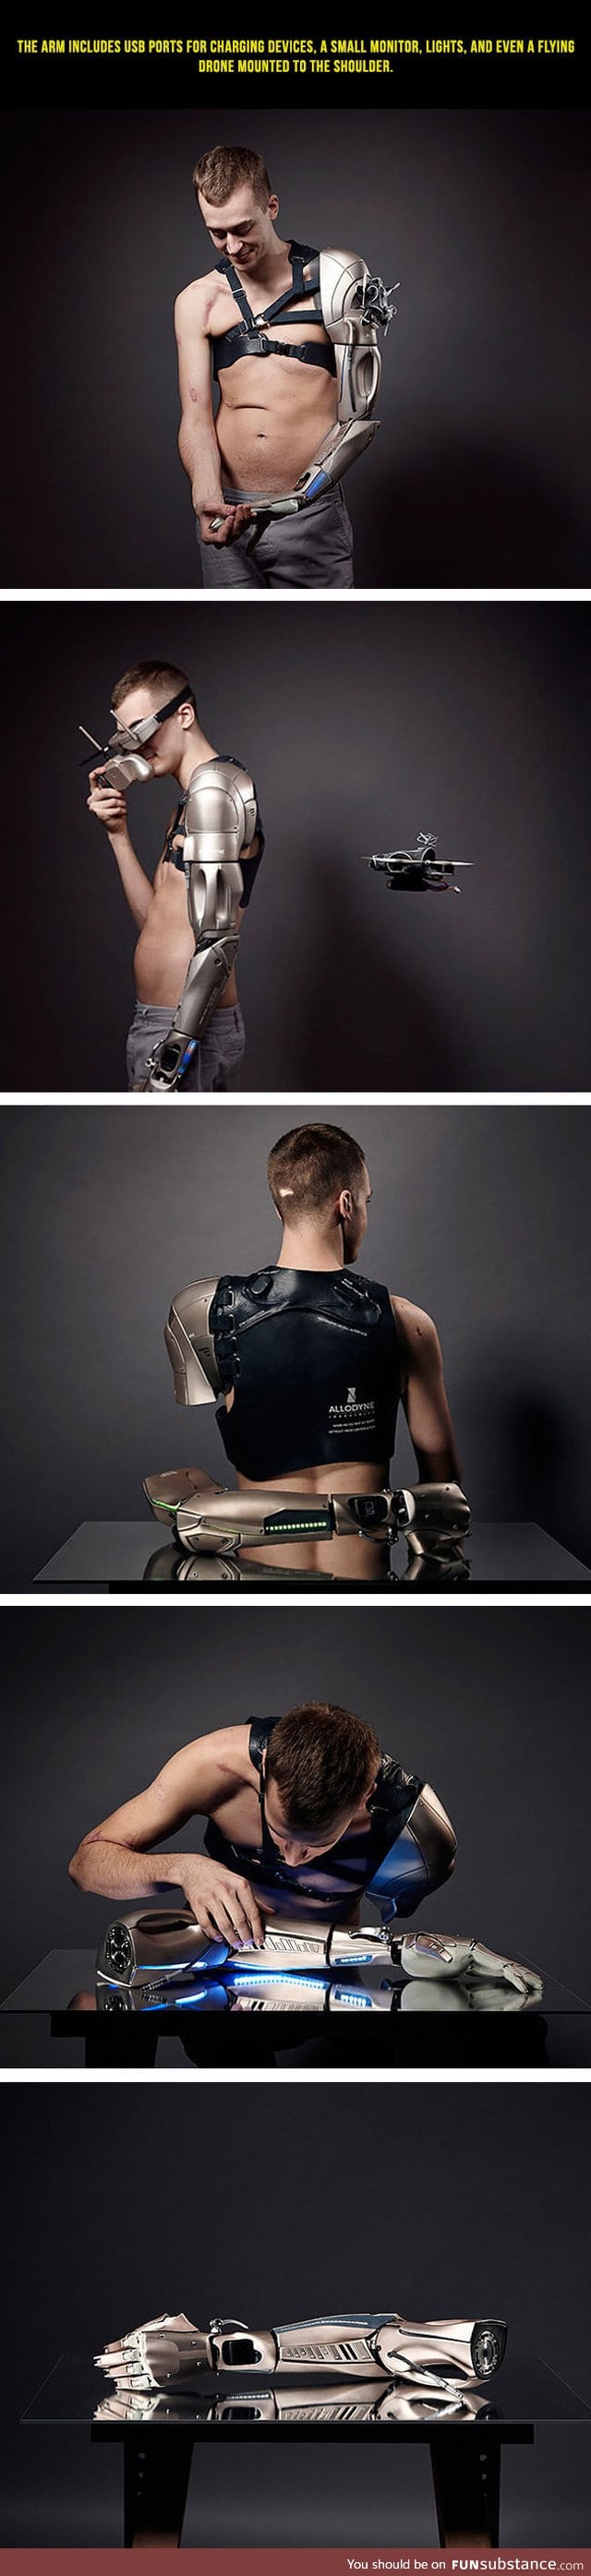 Amputee gamer gets metal gear solid inspired prosthetic arm